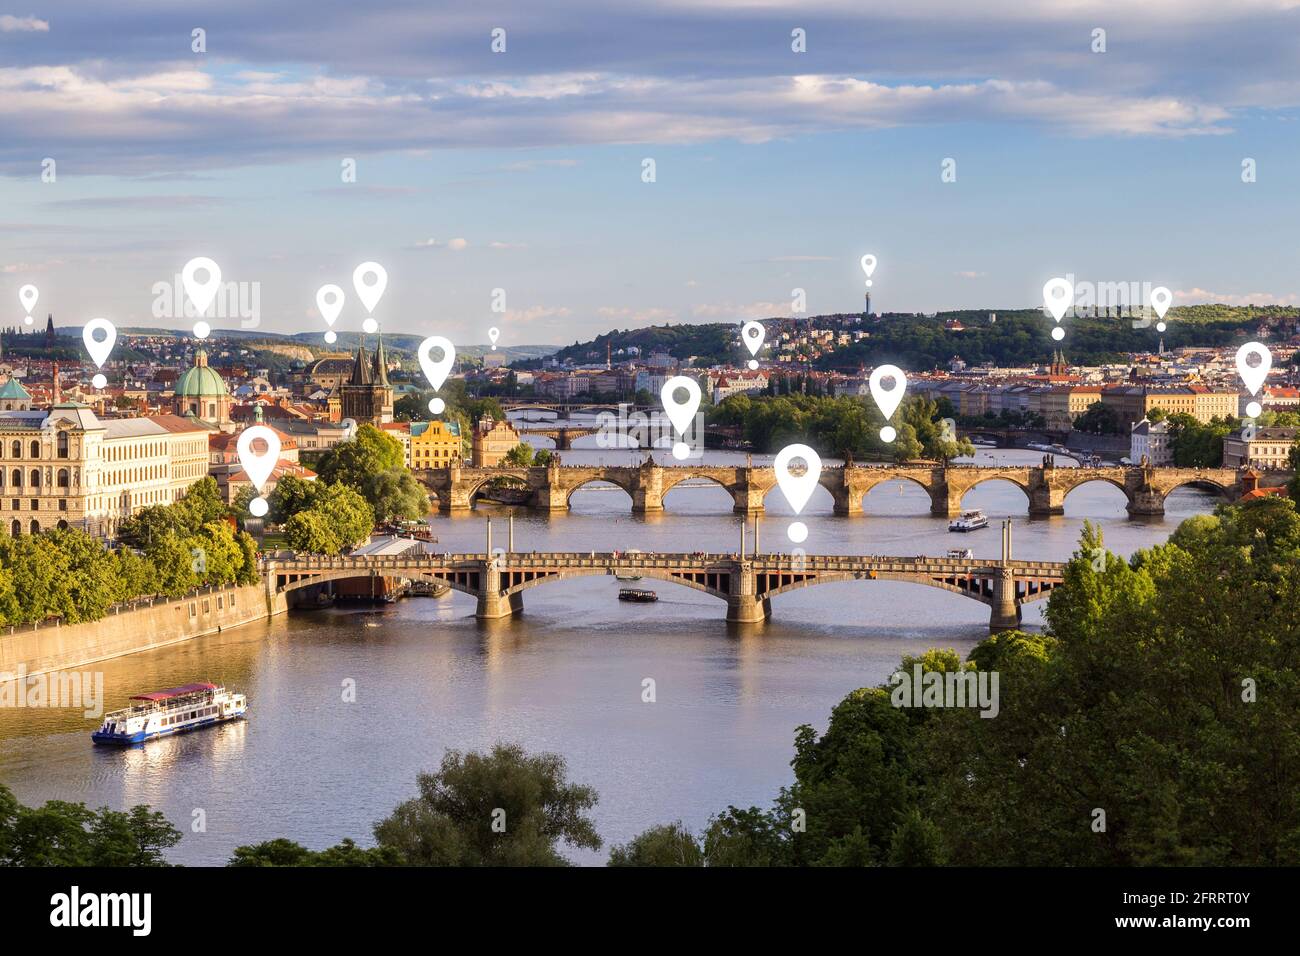 Map pin icons on Prague cityscape. Scenic view of buildings and bridges over Vltava River in Prague, Czech Republic, on a sunny day. Stock Photo